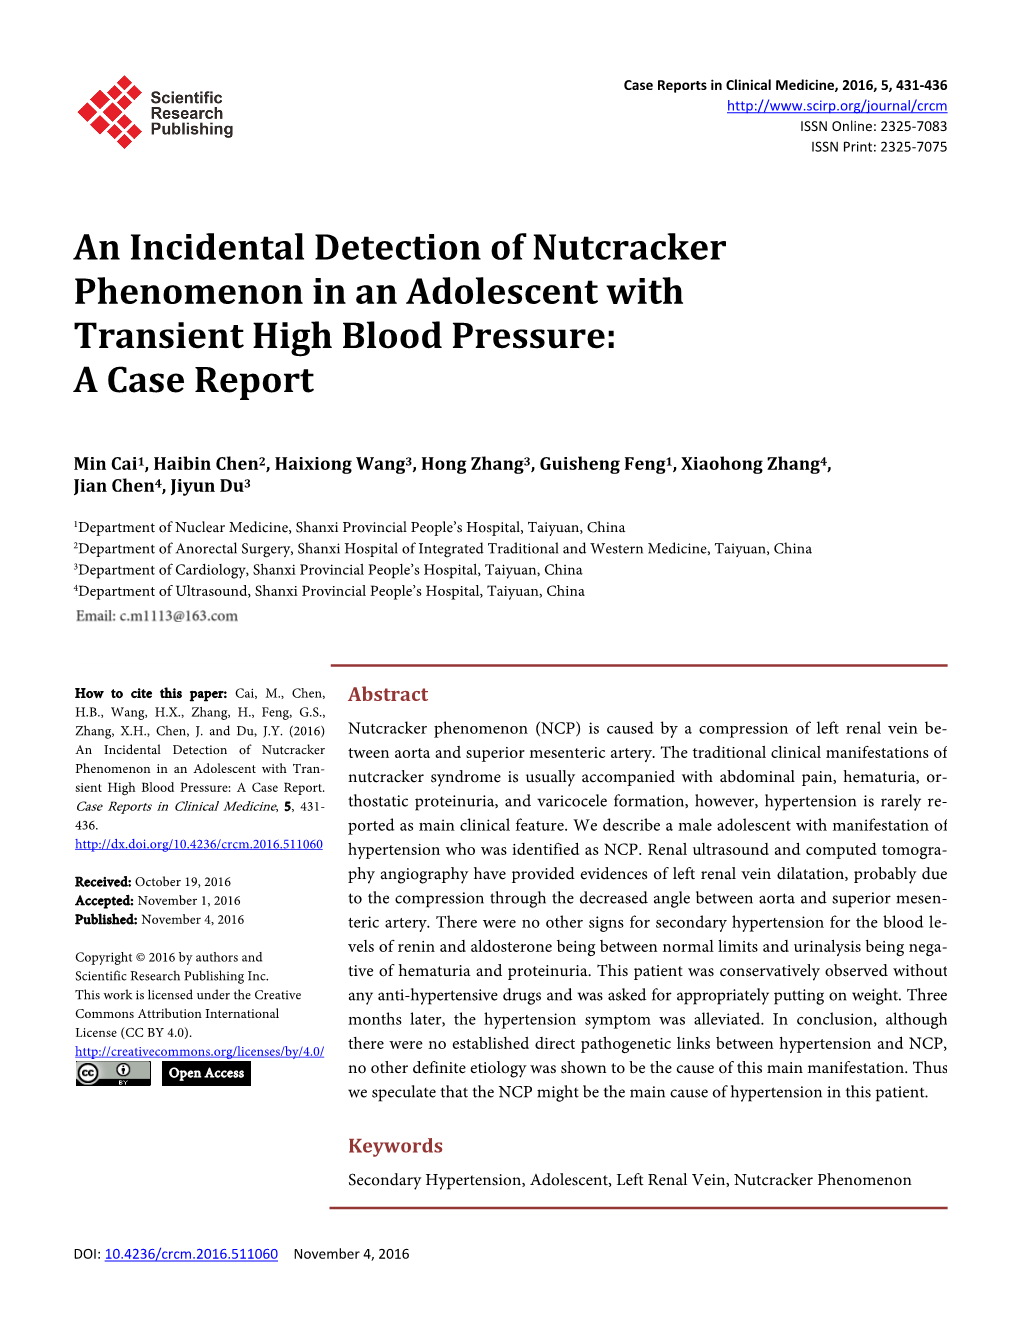 An Incidental Detection of Nutcracker Phenomenon in an Adolescent with Transient High Blood Pressure: a Case Report